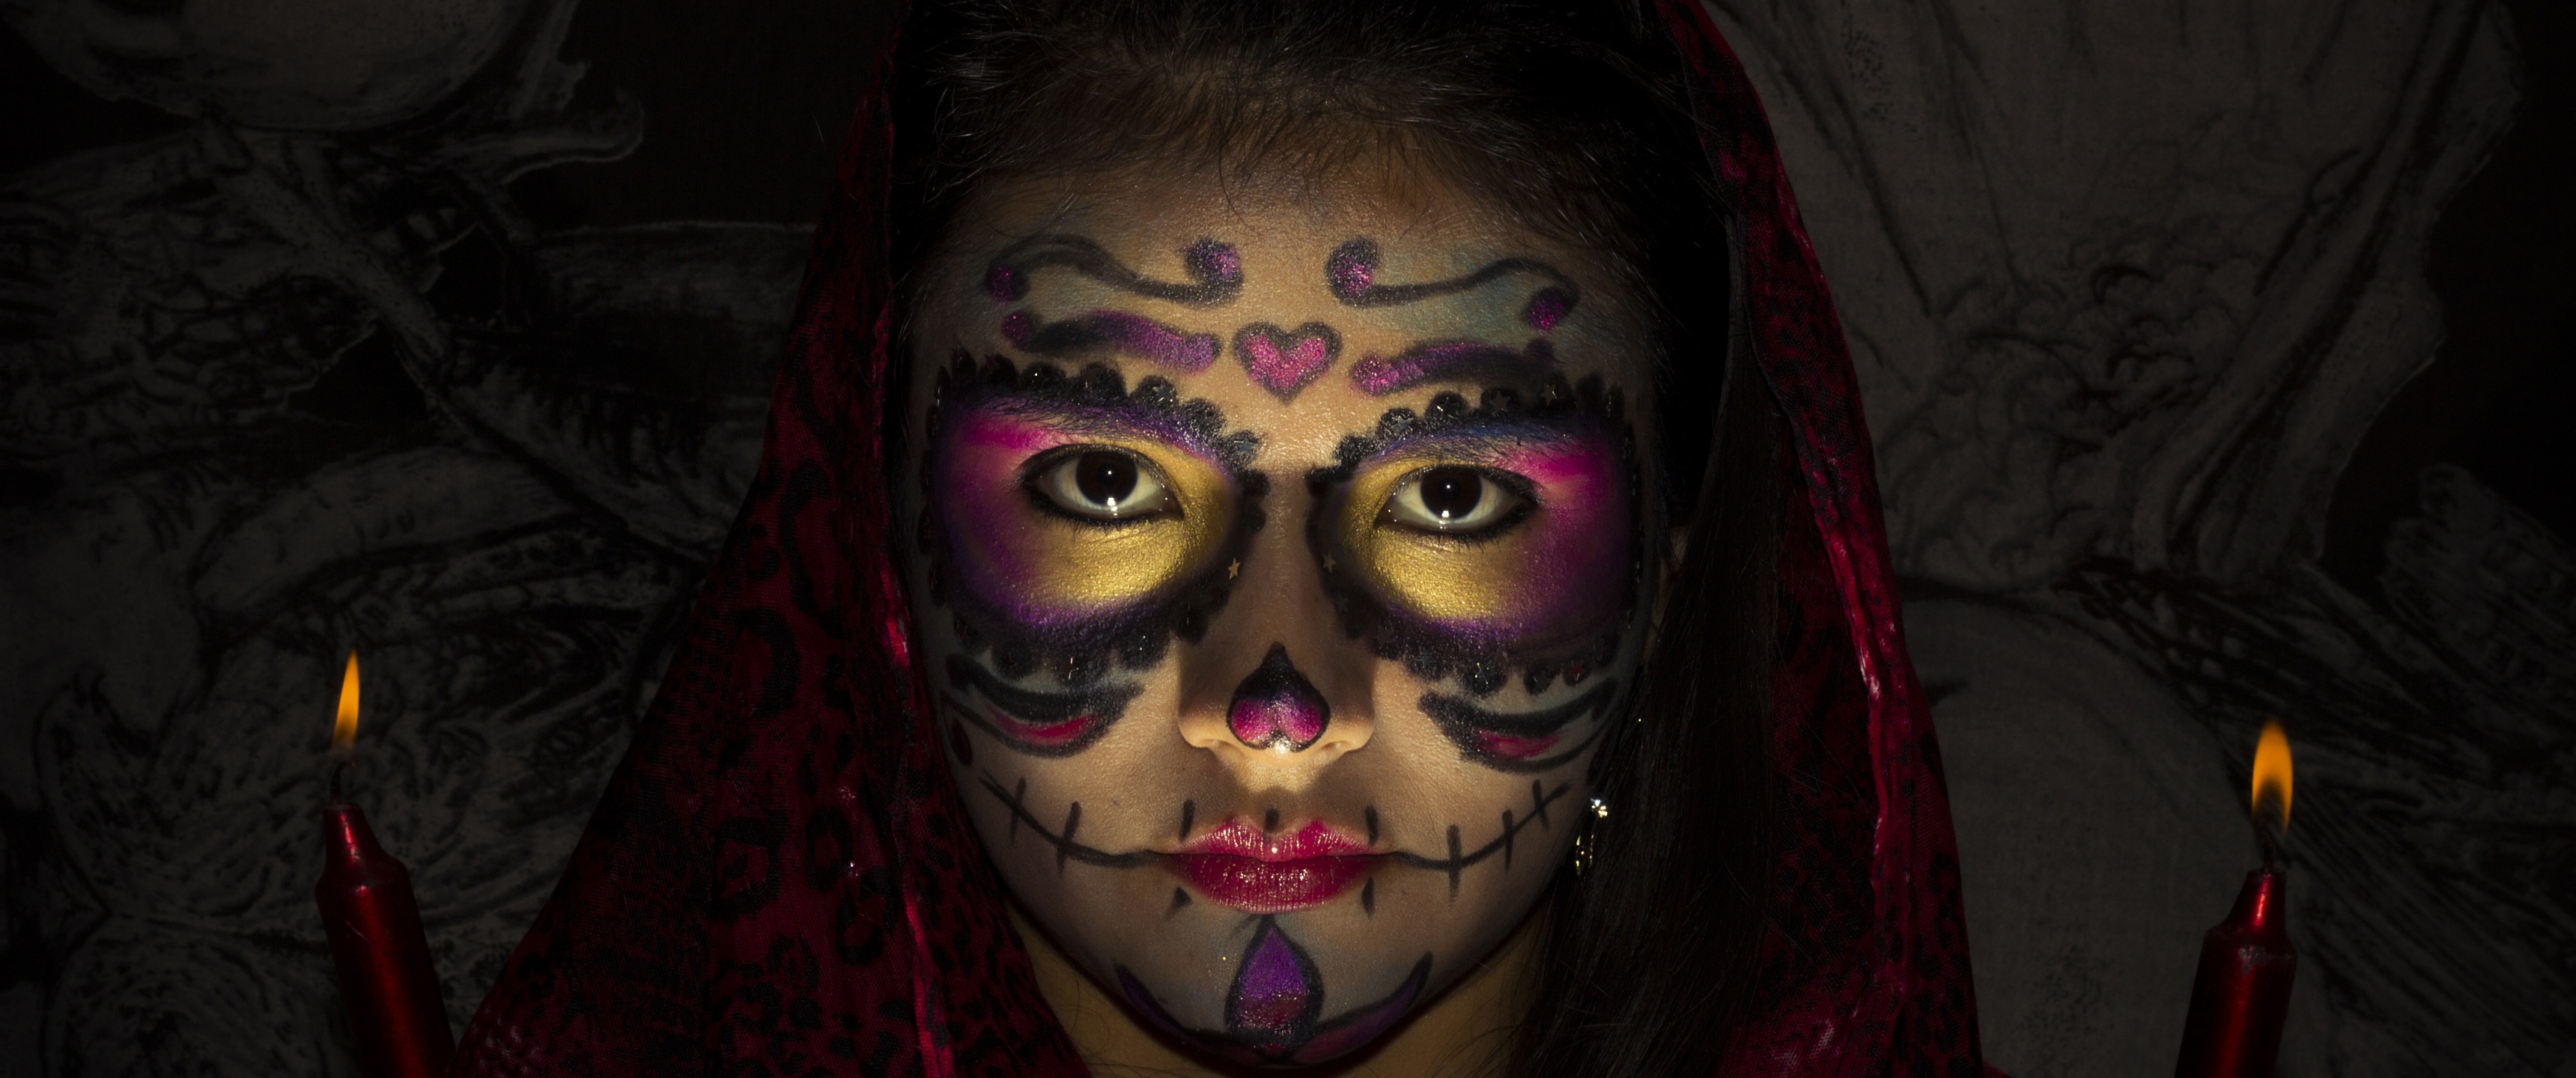 Woman Wallpaper 4K, Scary, Halloween, Mexican, Festival, 5K, Photography